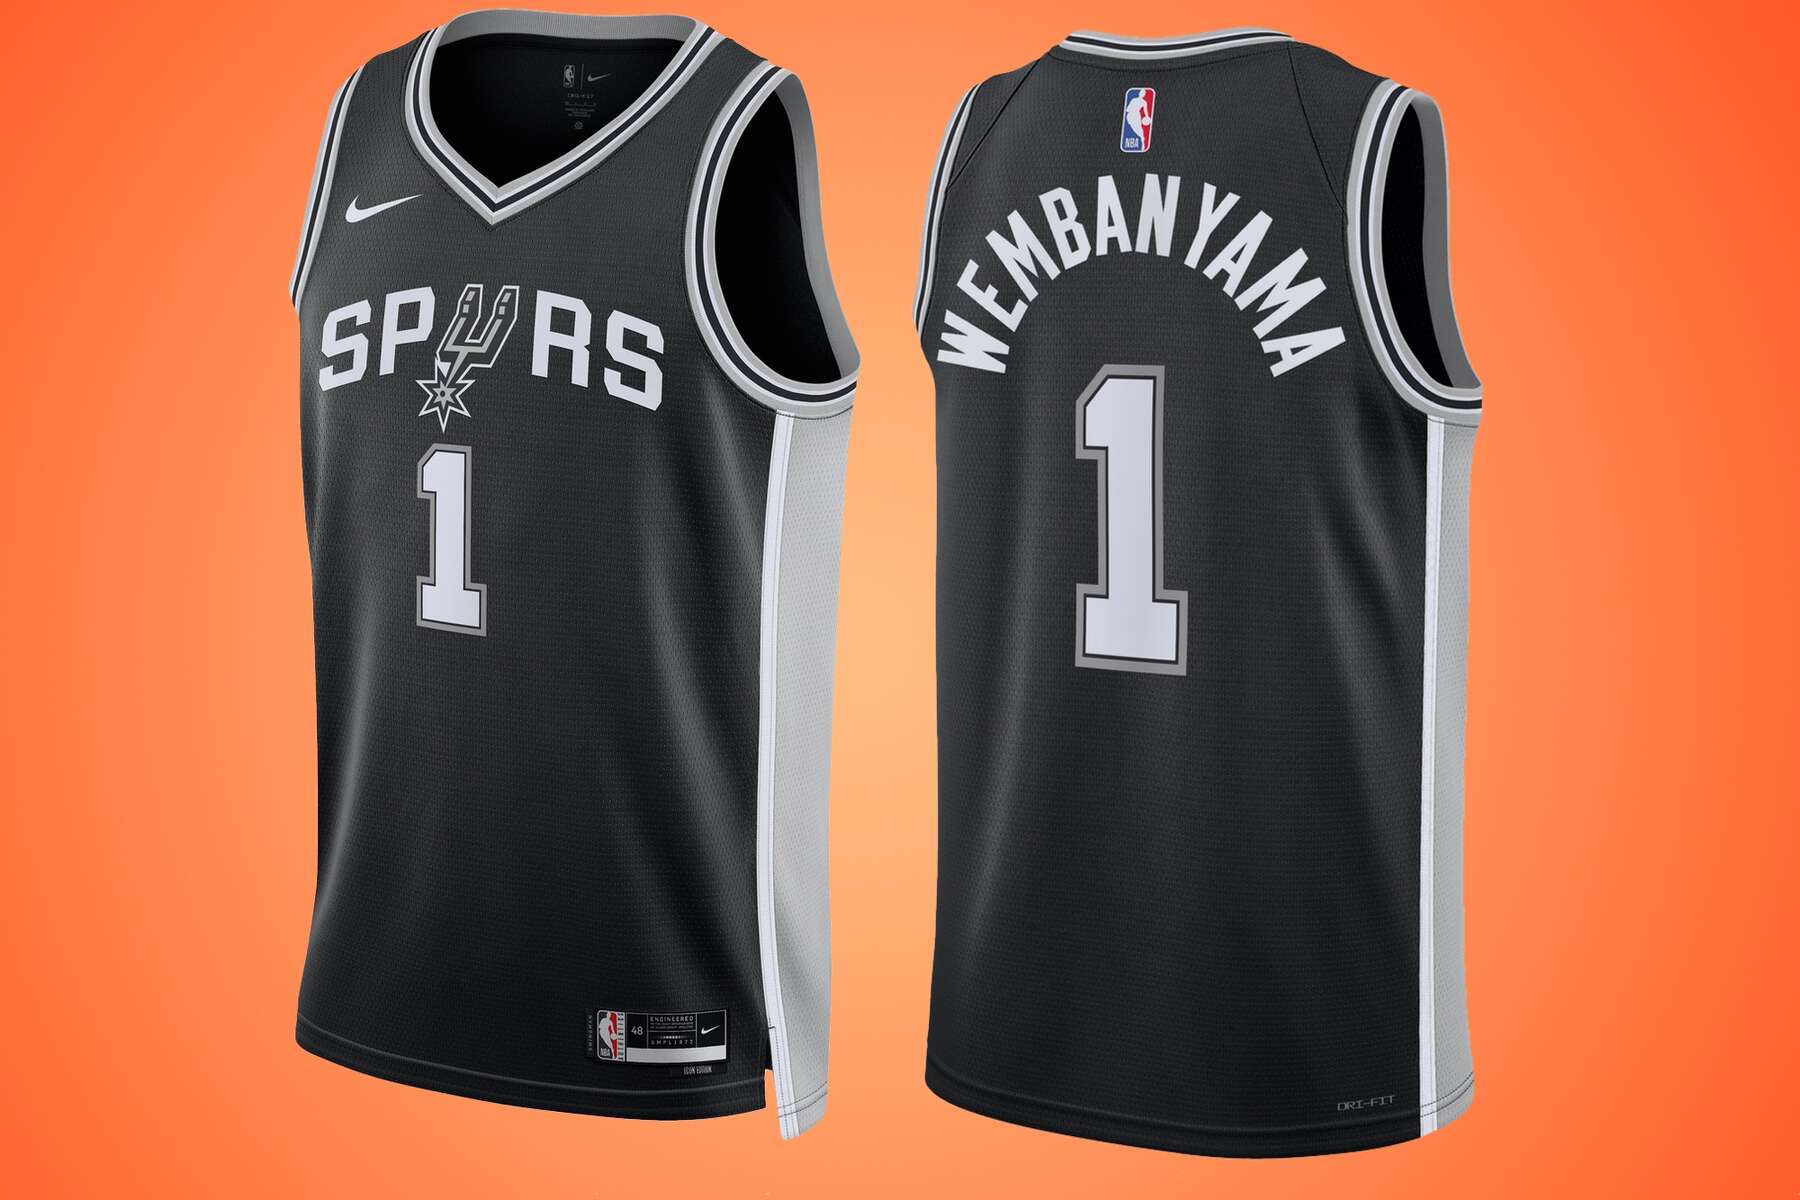 Designing and planning for the Spurs jerseys this season